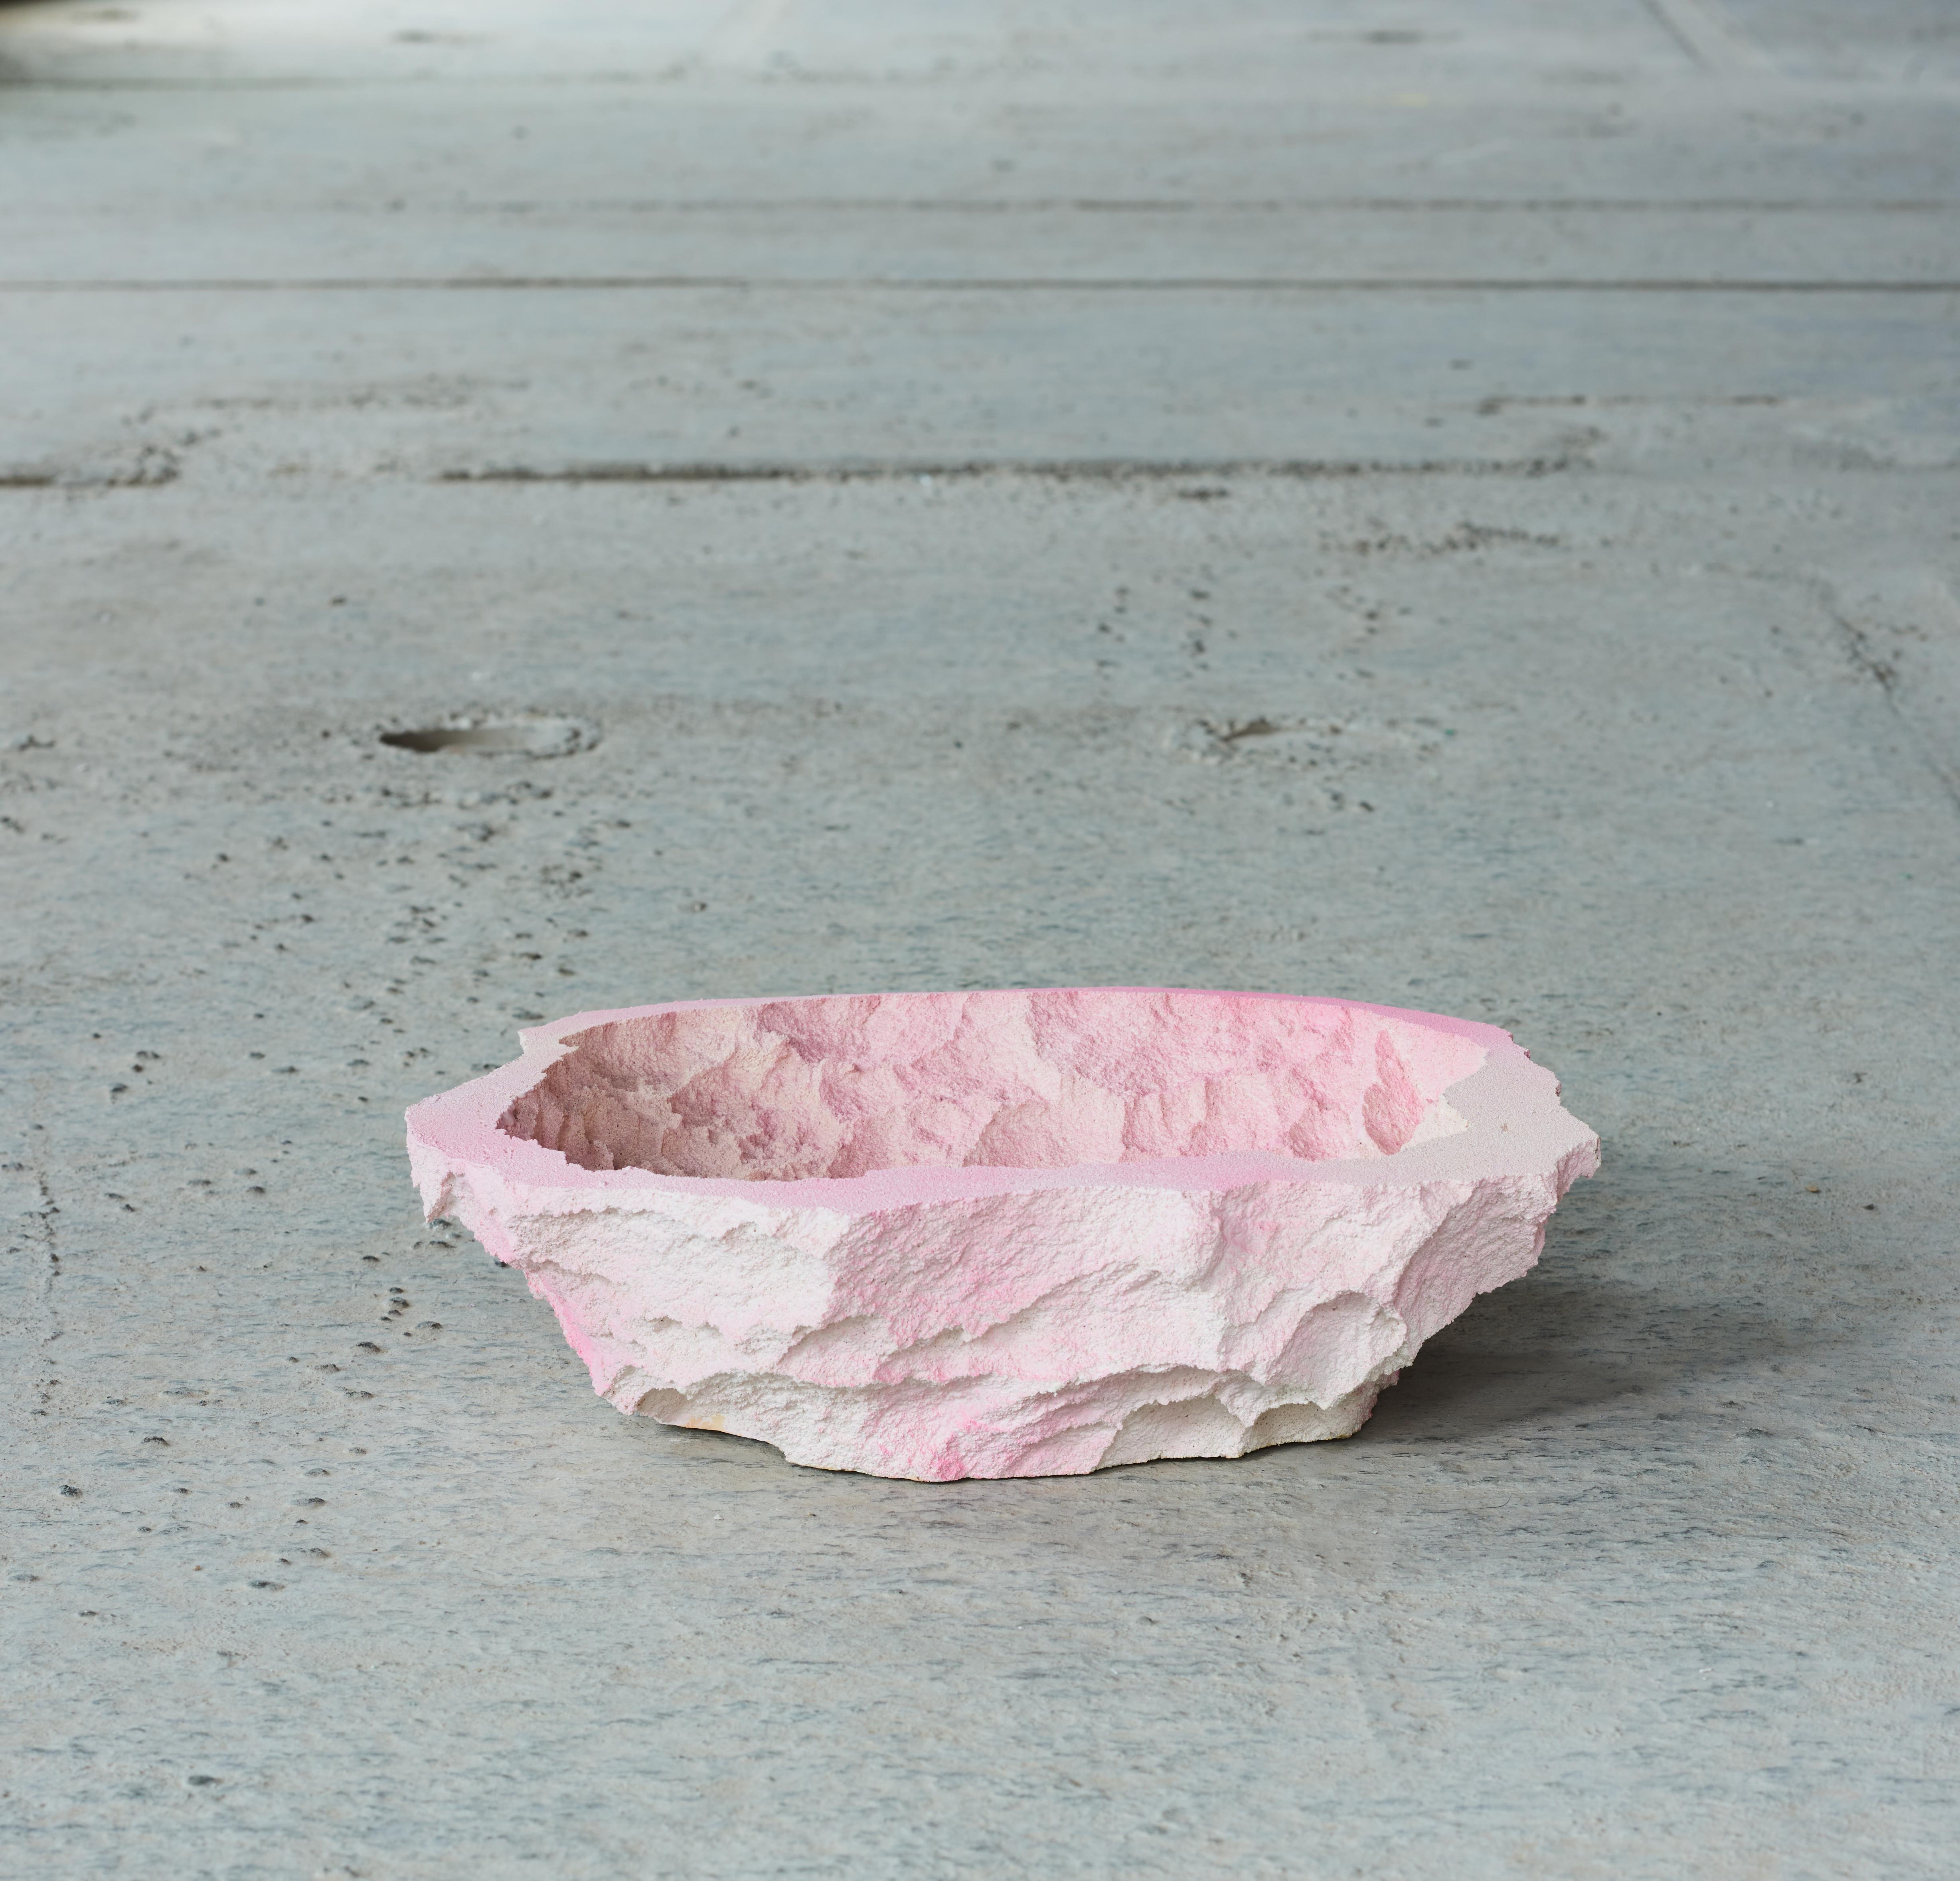 One-off a kind - Contemporary design, rock candy bowl, embody the surface of roscks and stone.
Made by the art and design duo Andredottir & Bobek

They have in this collection imitated landscape with artificial materials and created an artificial